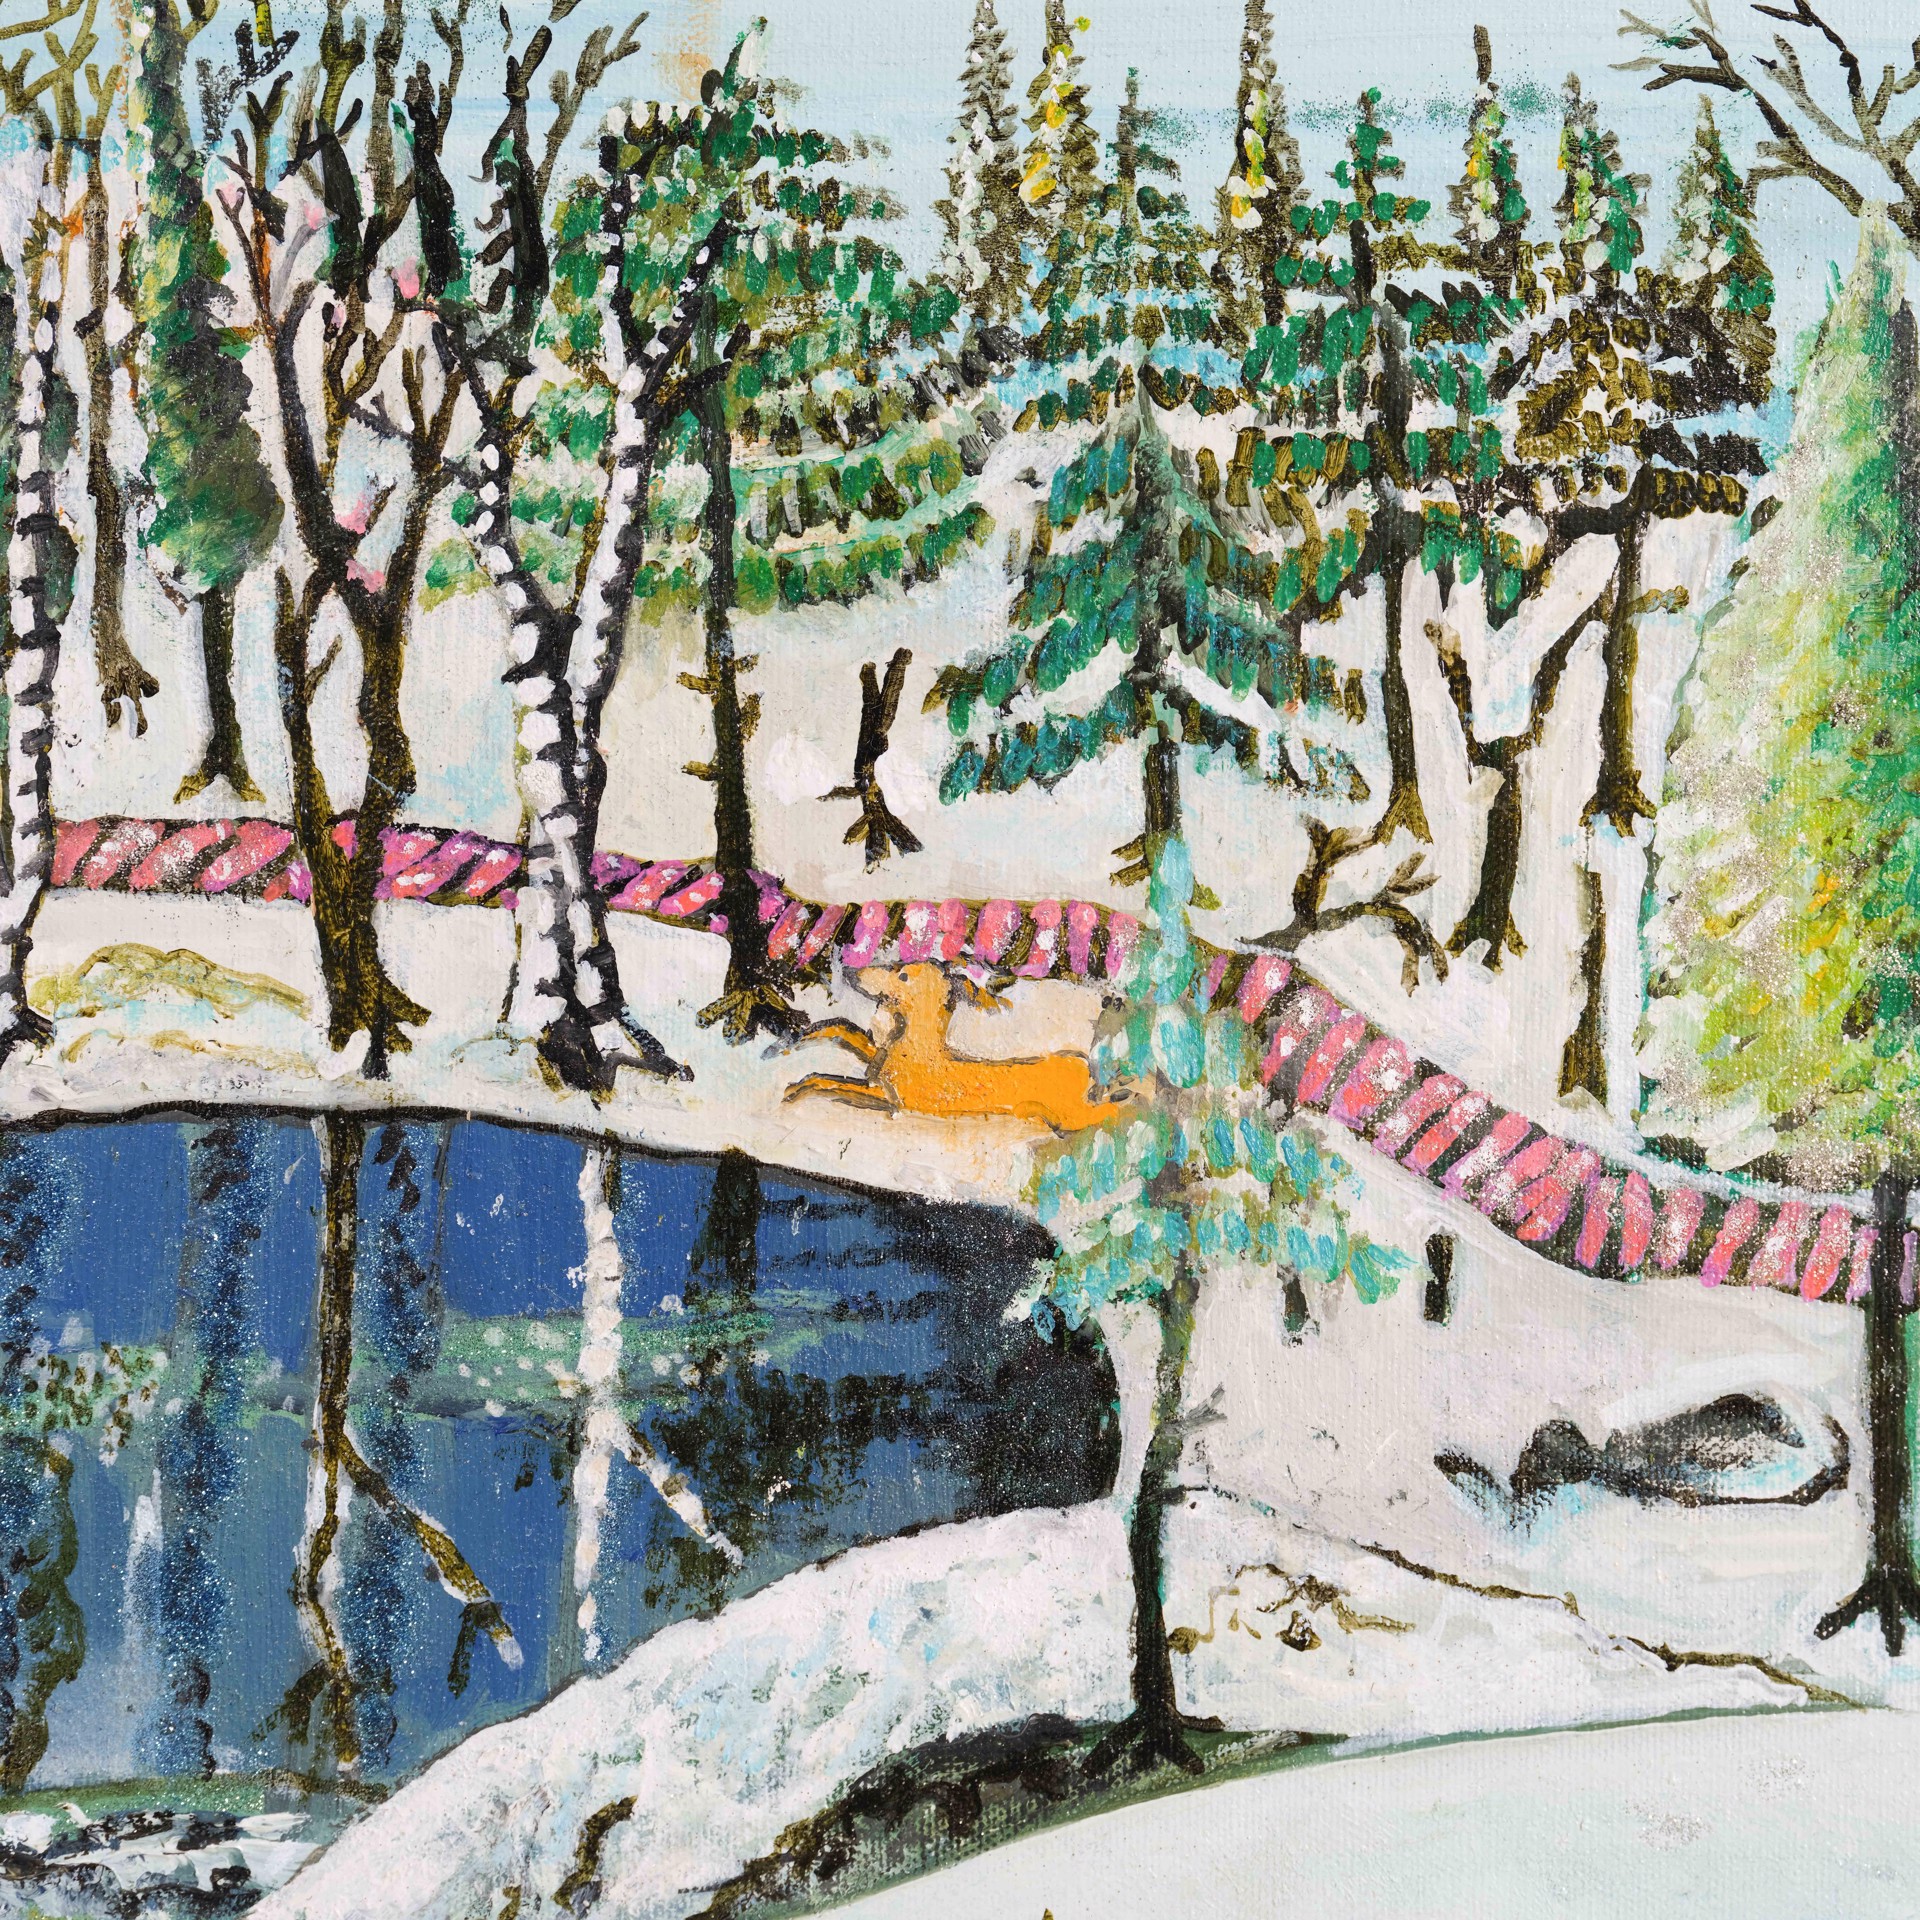 Paysage d'hiver - Lac Brome by Odile Cloutier